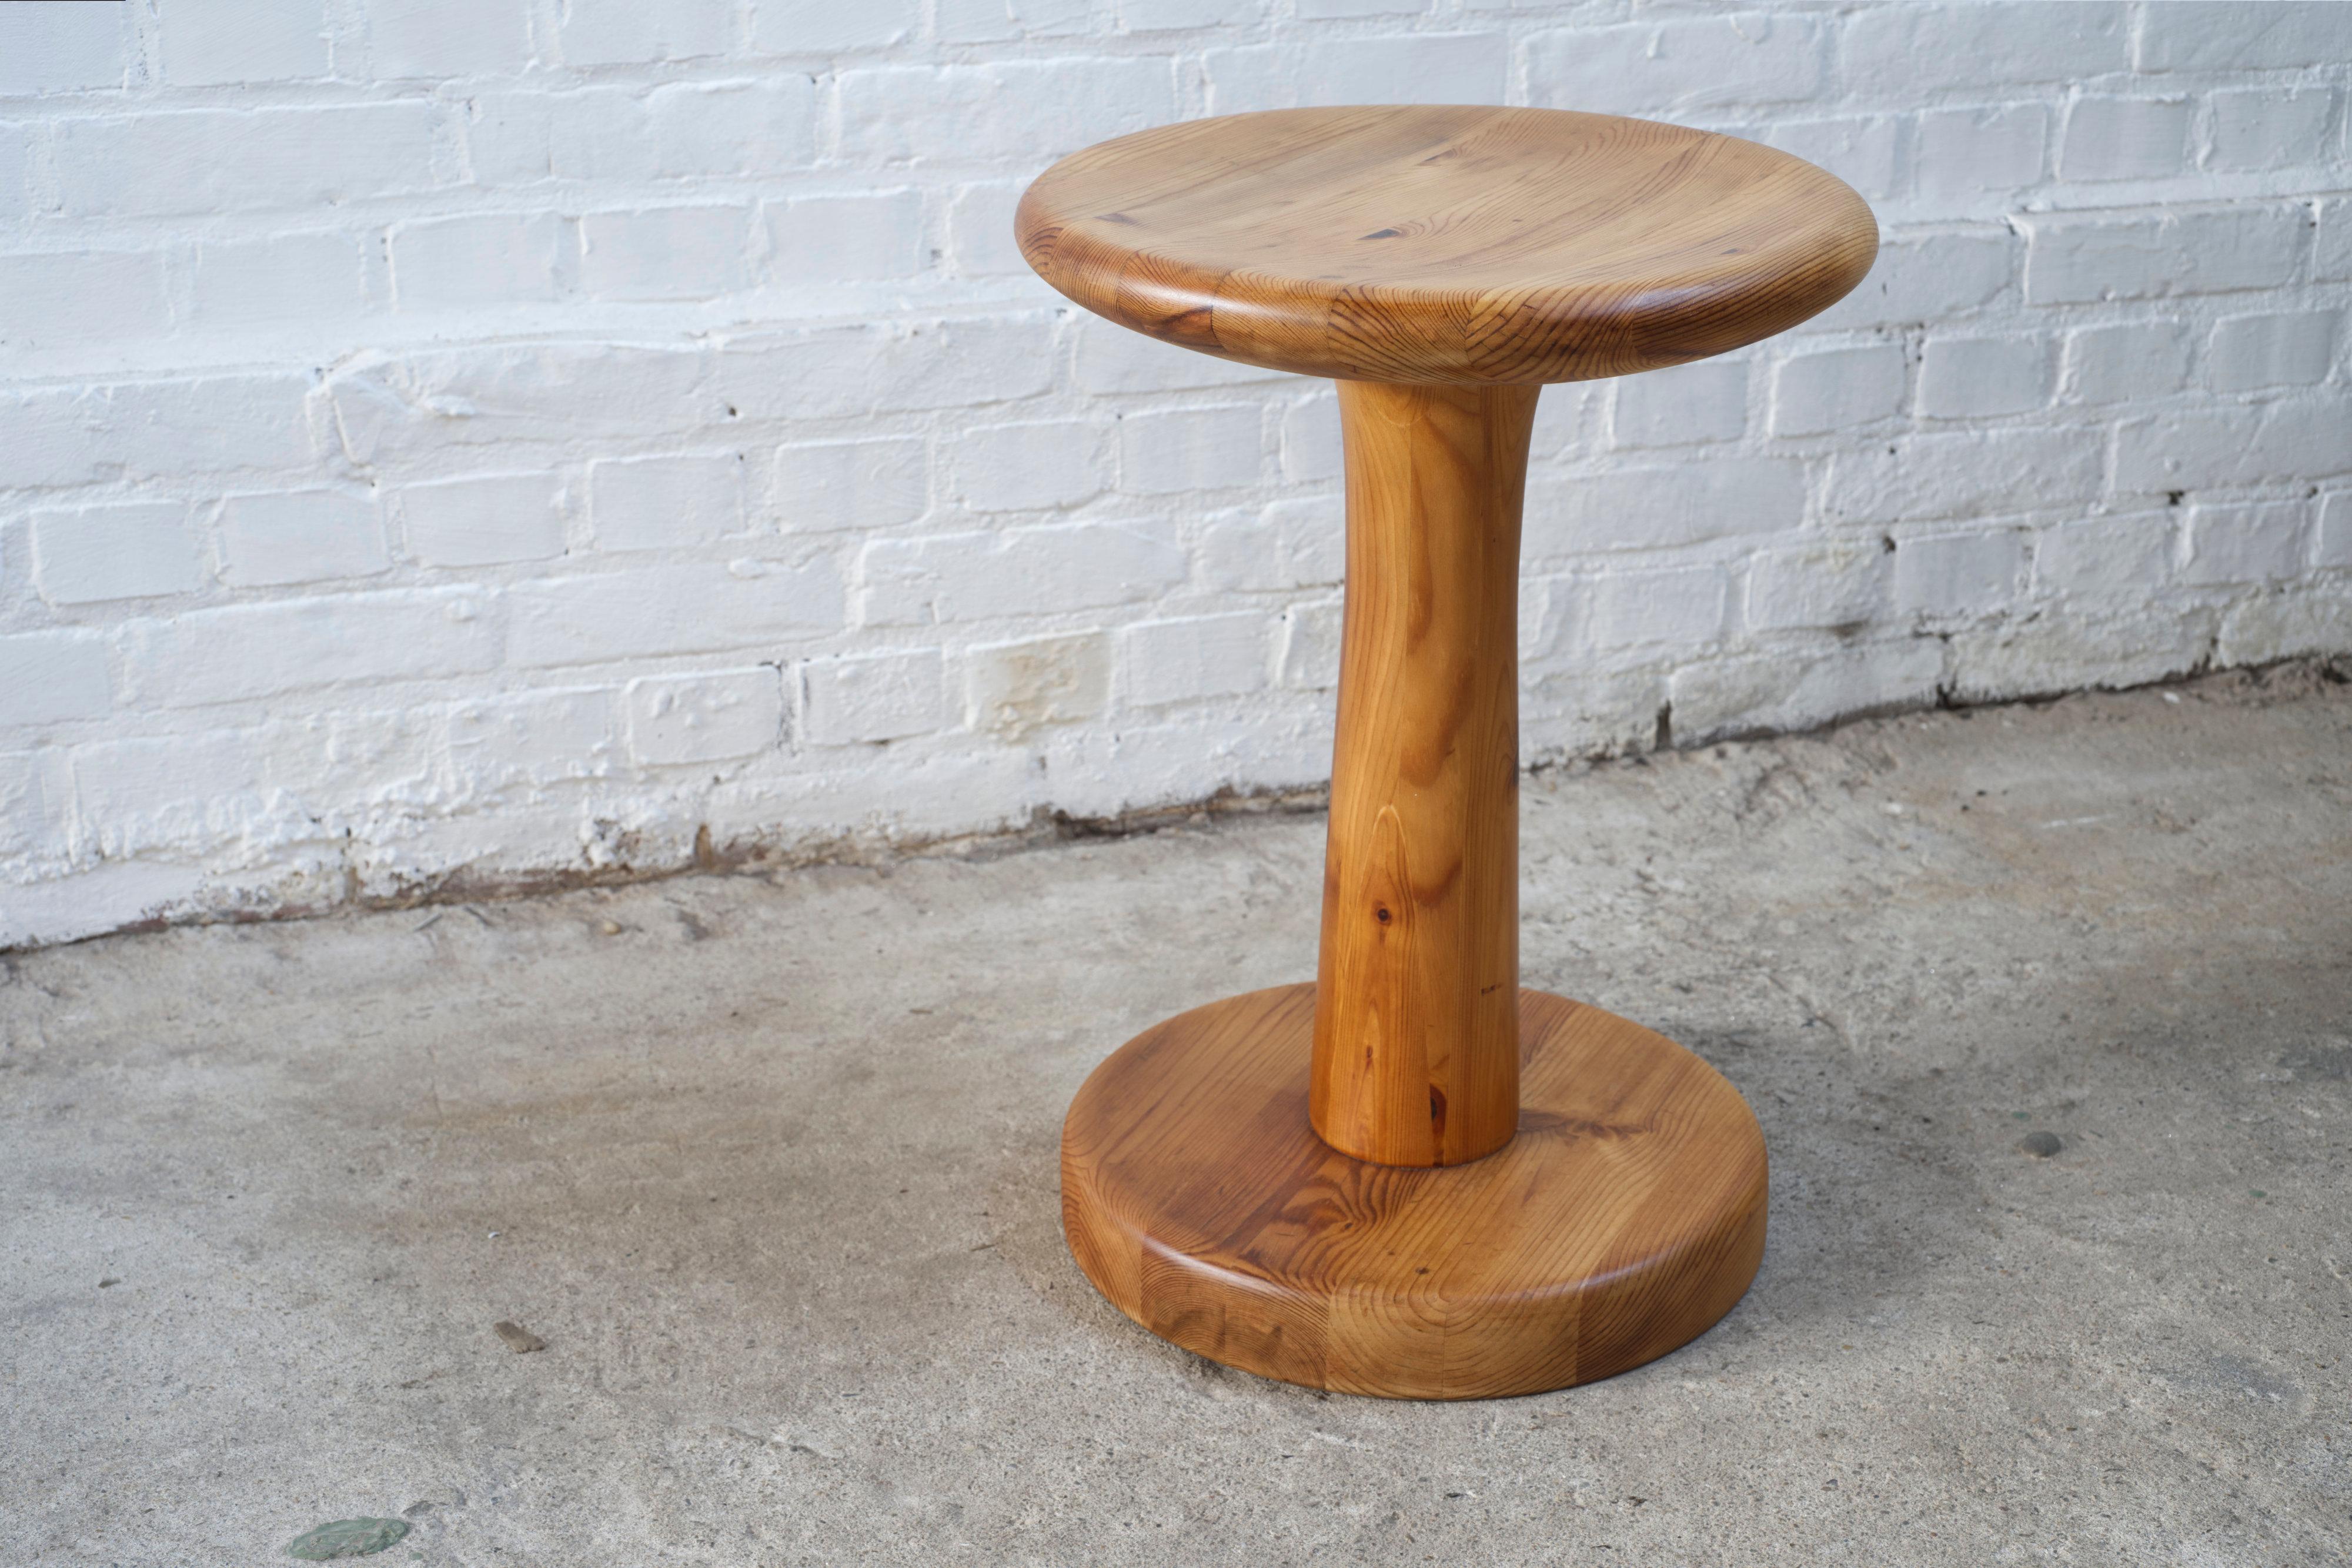 A very functional and elegant pine stool attributed to Rainer Daumiller for Hirtshals 1960s - Denmark. Solid sculpted and turned pine stool. A perfect minimalist and modernist design. Can be used as stool, table, flower stand and footrest.

The